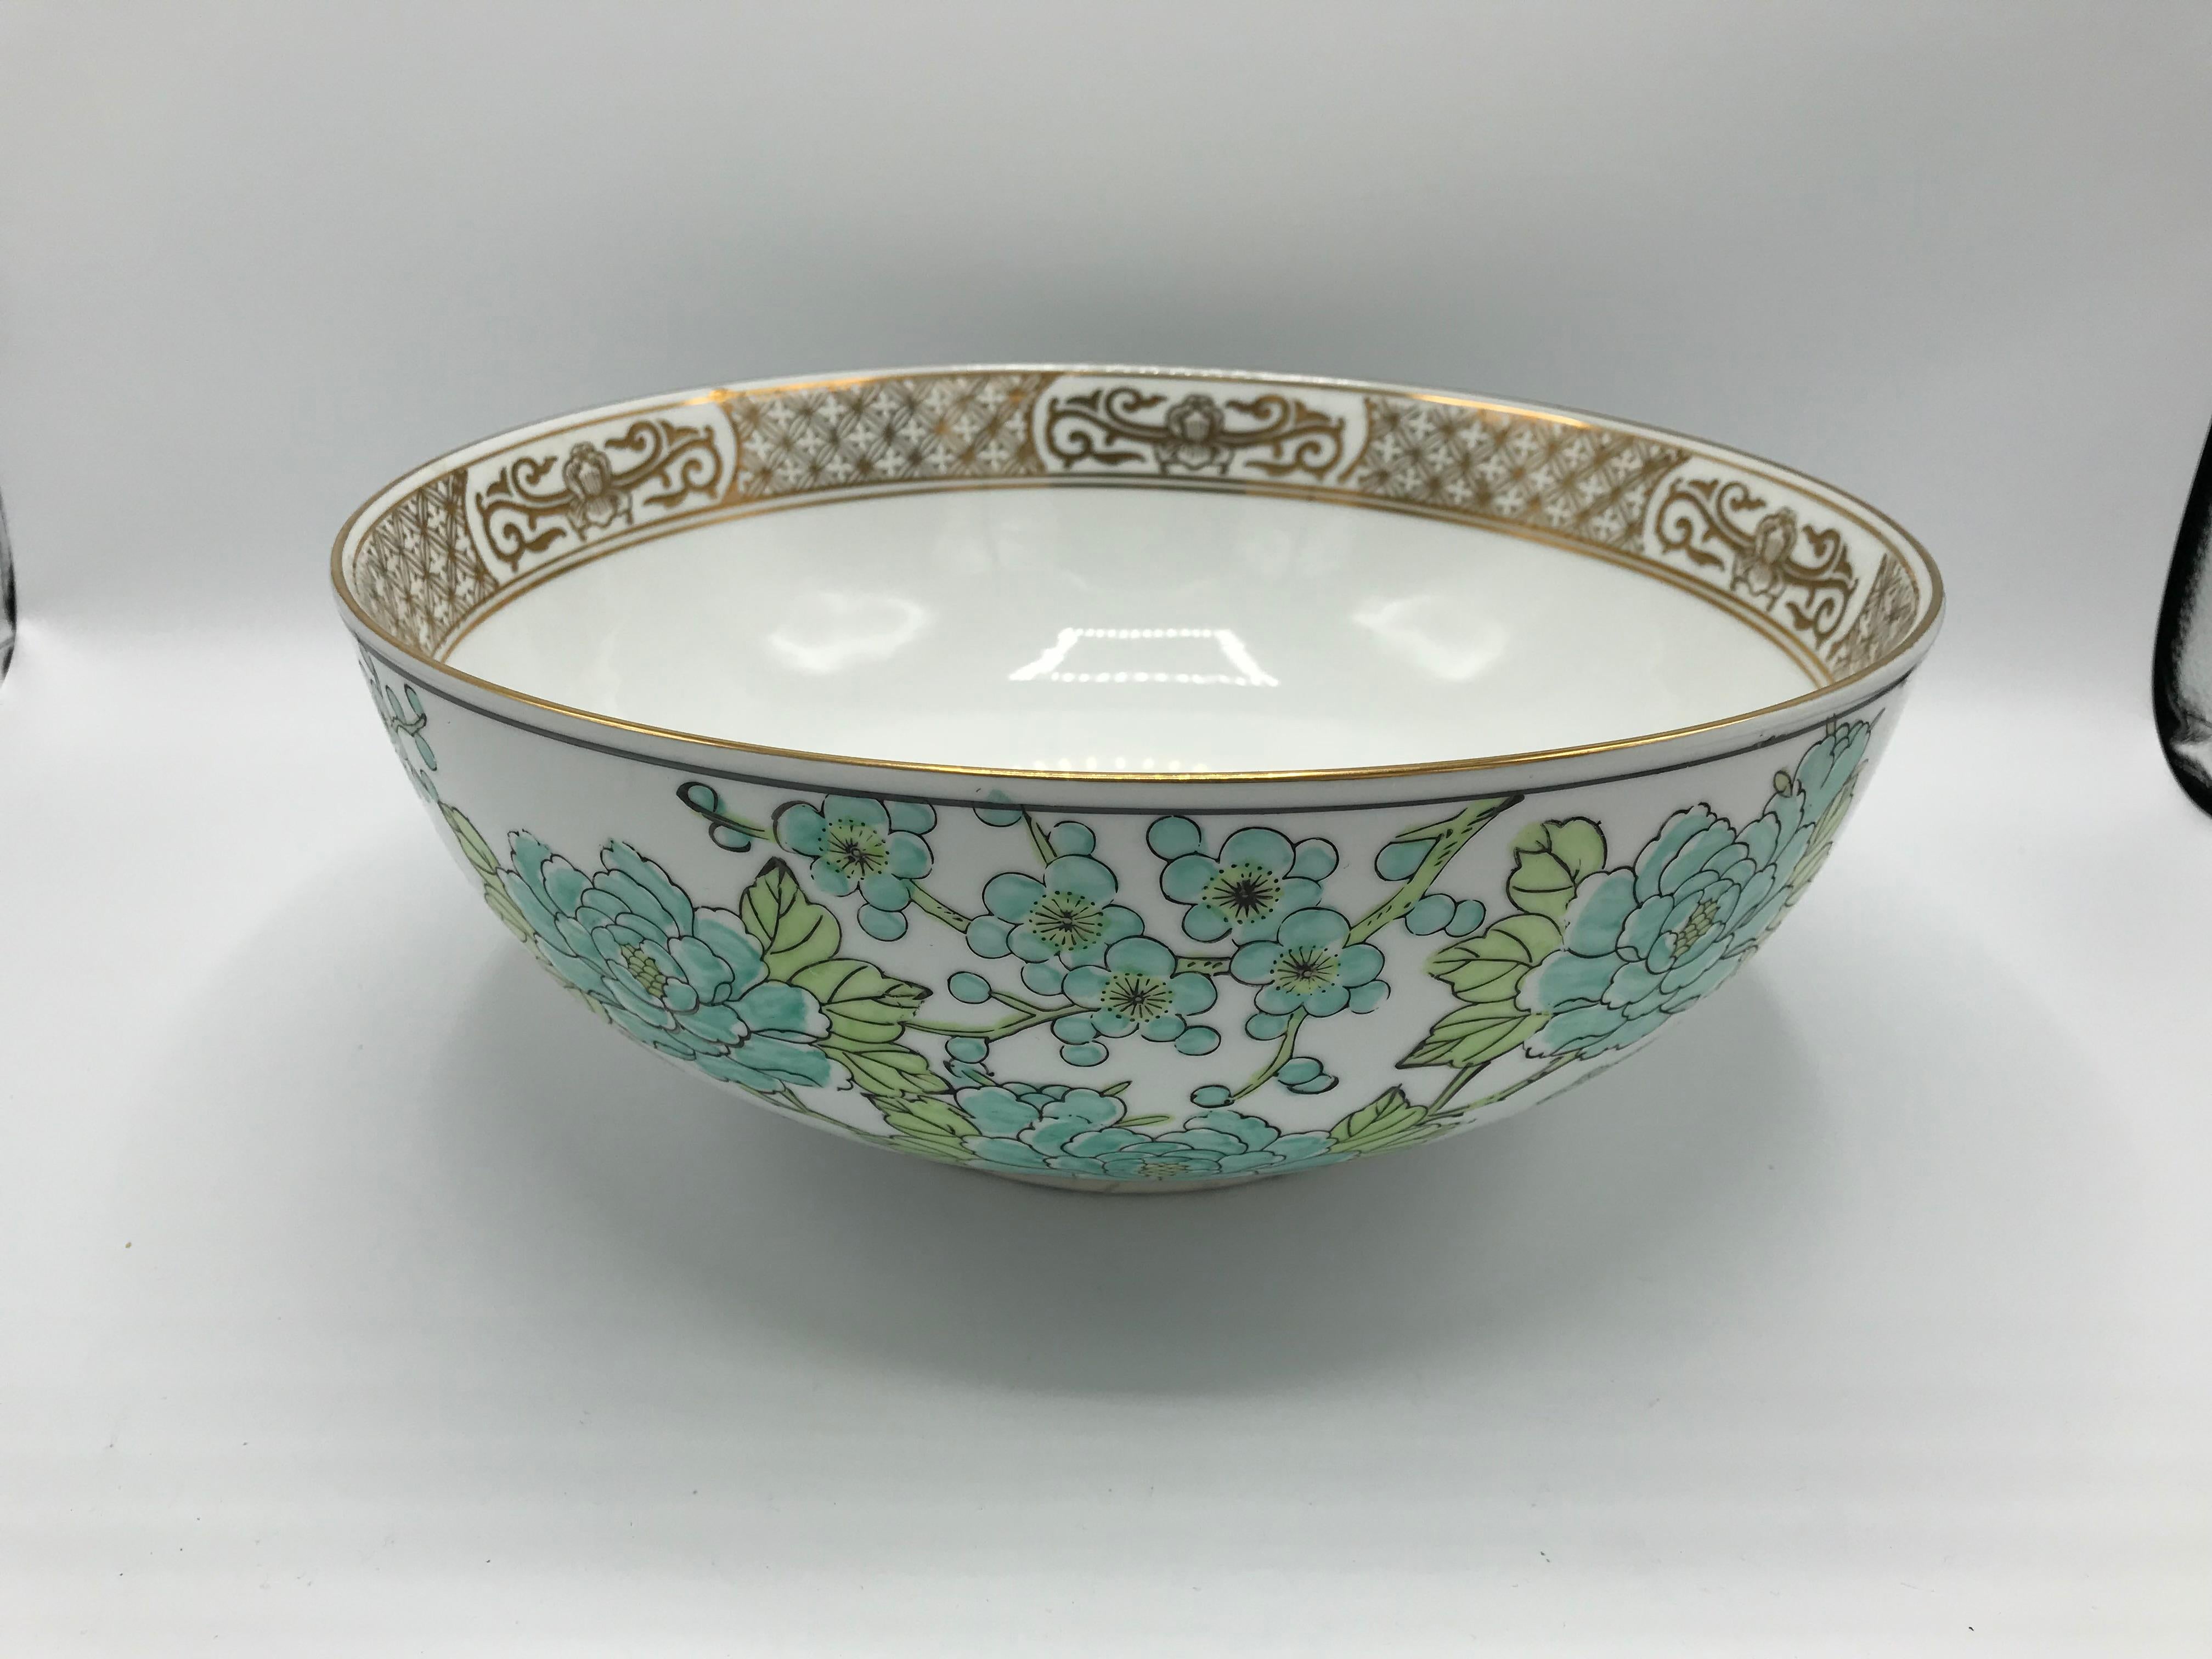 Offered is a fabulous, 1960s Gold-Imari porcelain peacock motif punch bowl. This large centerpiece bowl, has a gorgeous hand-painted green and gold peacock and floral motif all-over. Marked 'Gold Imari' on underside. Heavy, nearly 6lbs.